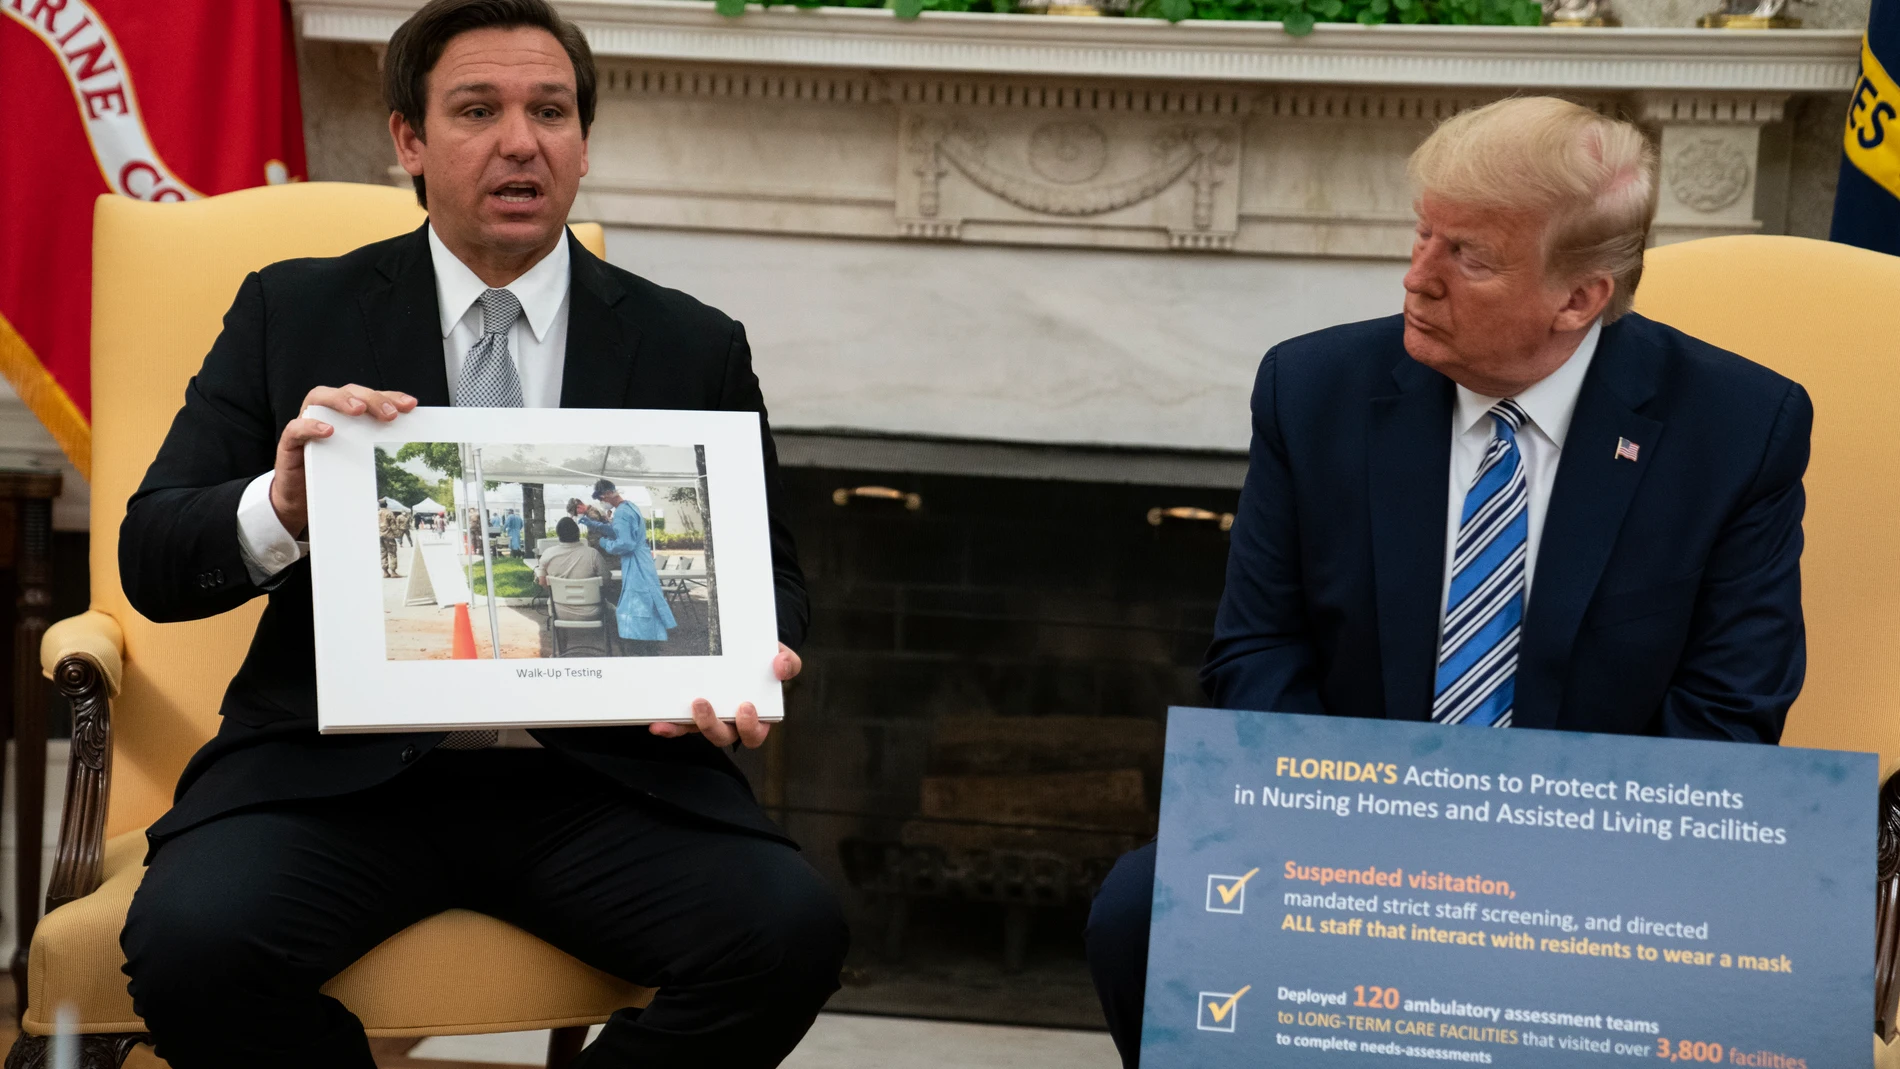 FILE - President Donald Trump listens as Florida Gov. Ron DeSantis talks about the coronavirus response during a meeting in the Oval Office of the White House, April 28, 2020, in Washington. Before Trump and DeSantis were leading rivals for the 2024 Republican presidential nomination, they were allies. (AP Photo/Evan Vucci, File)